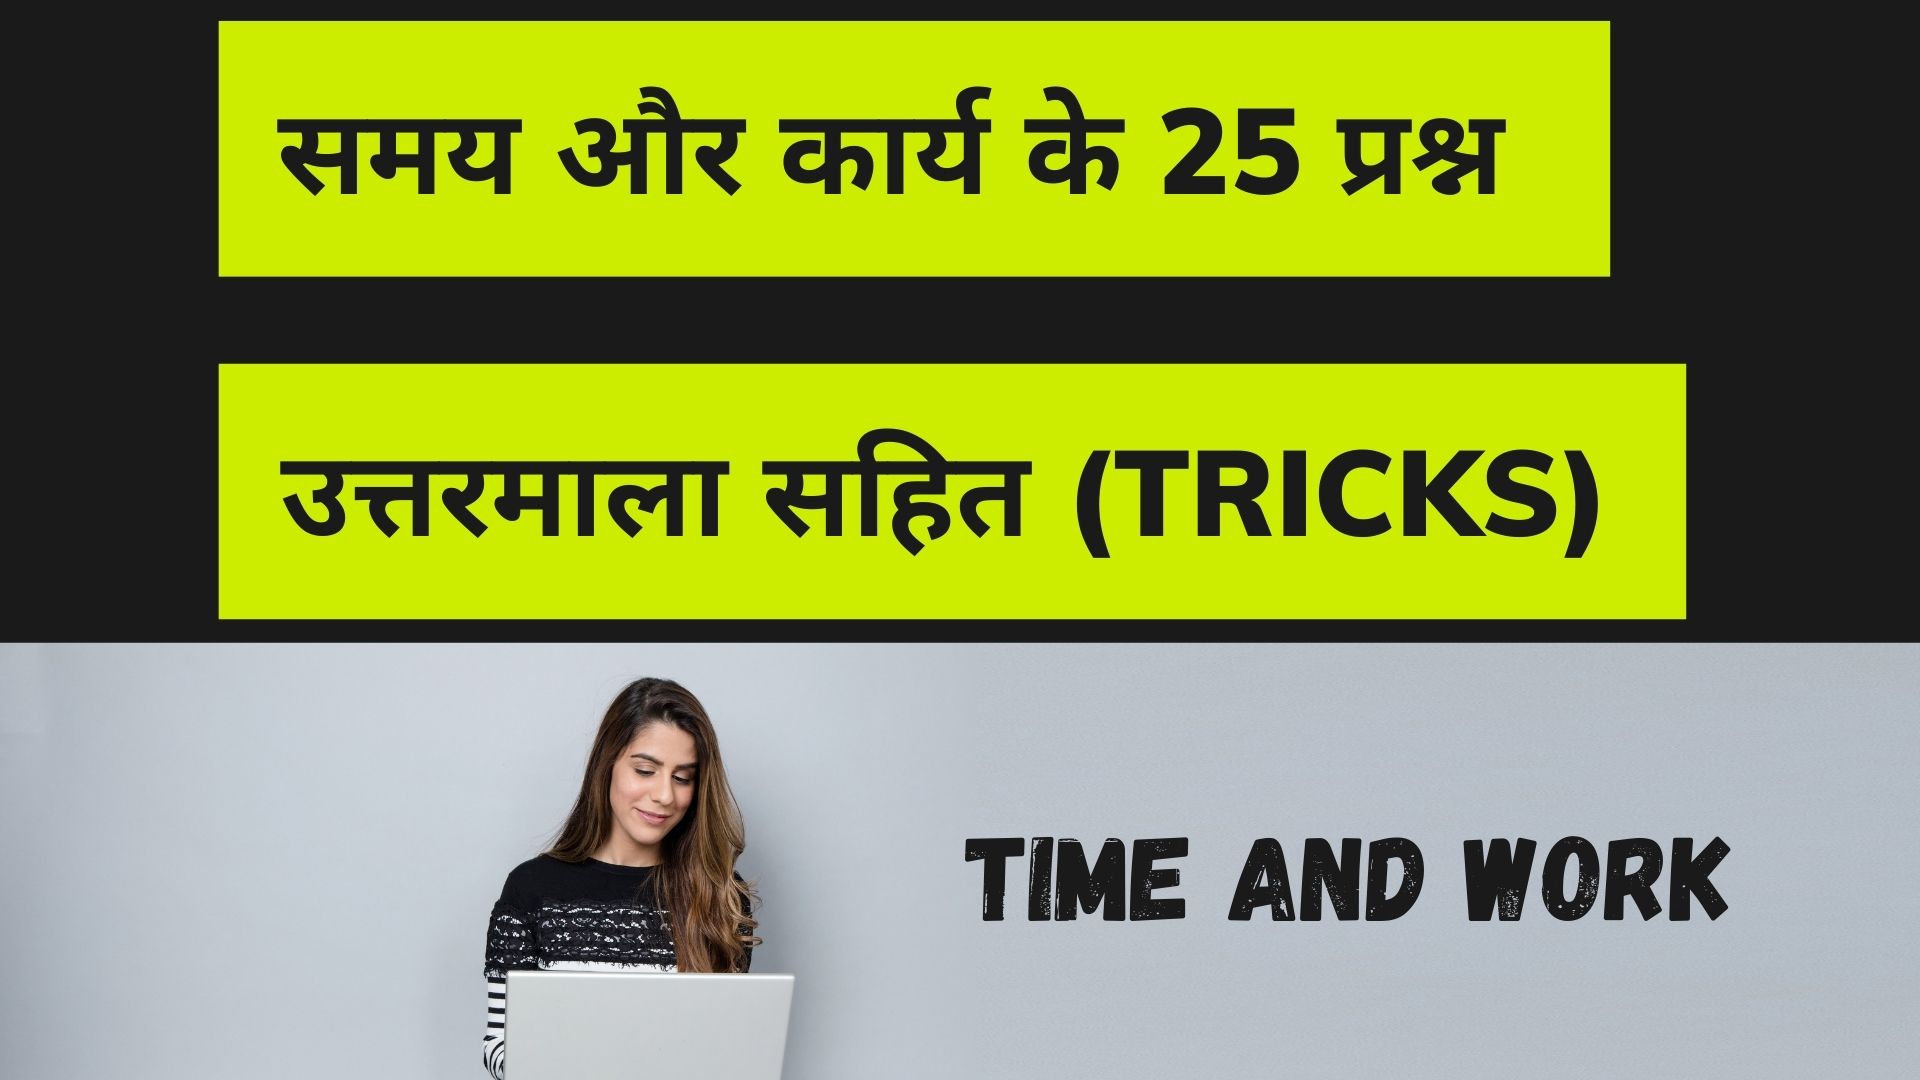 reporting time work meaning in hindi